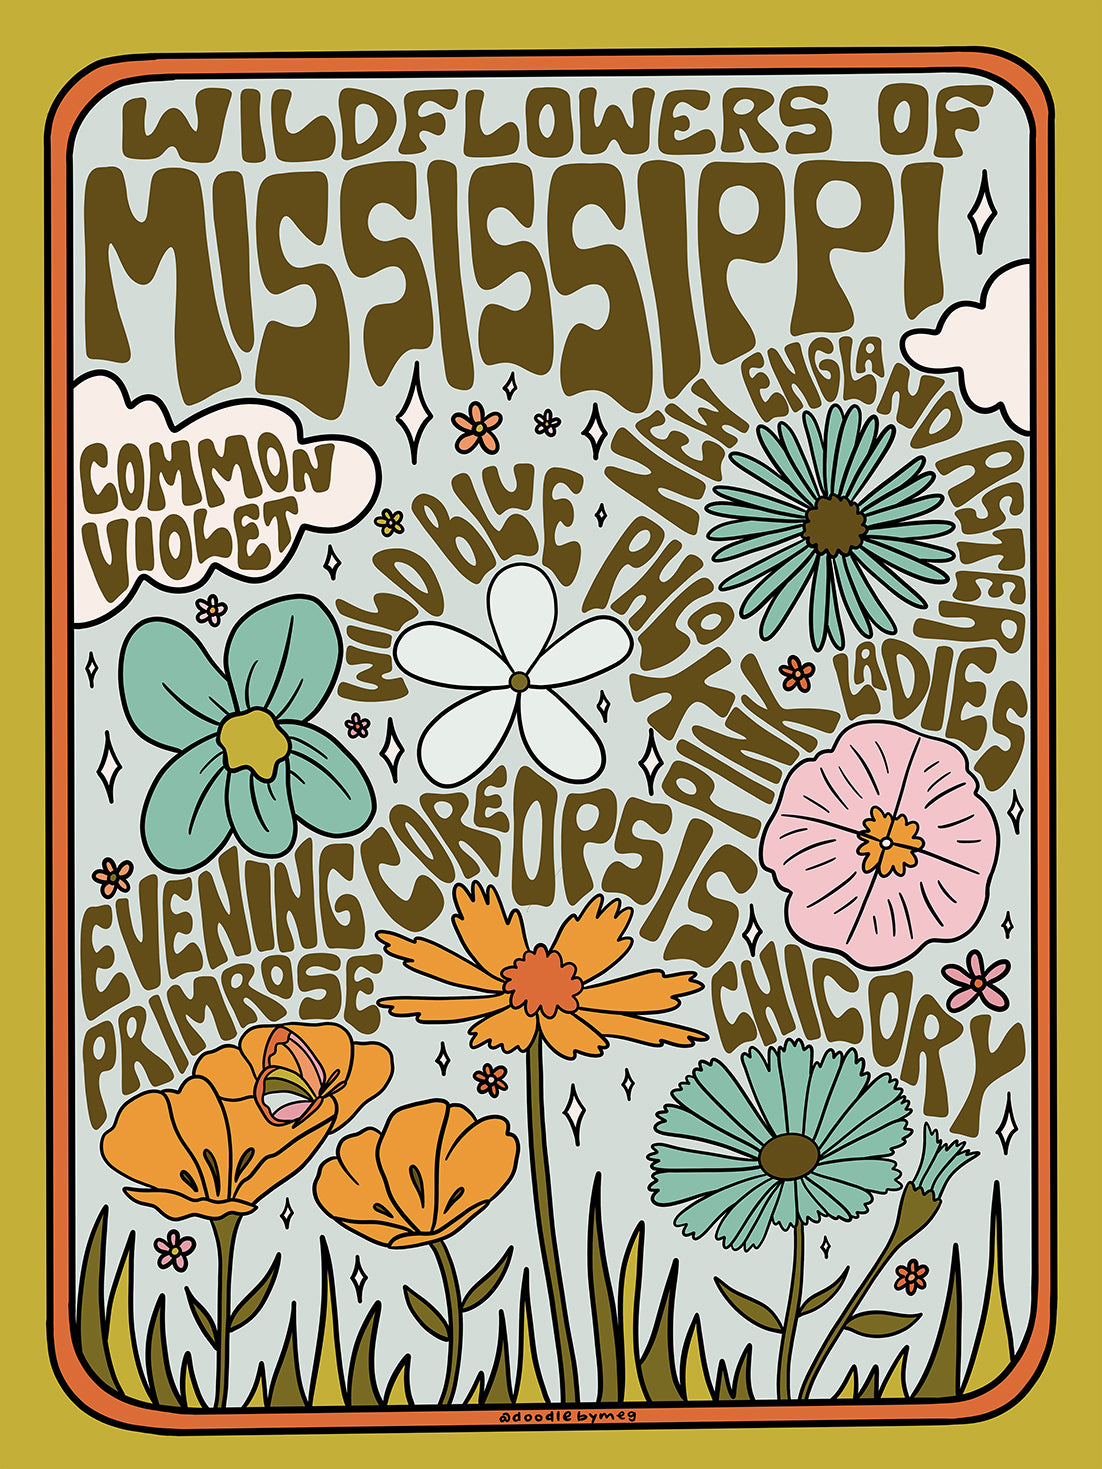 Meghan Wallace -  Mississippi Wildflowers